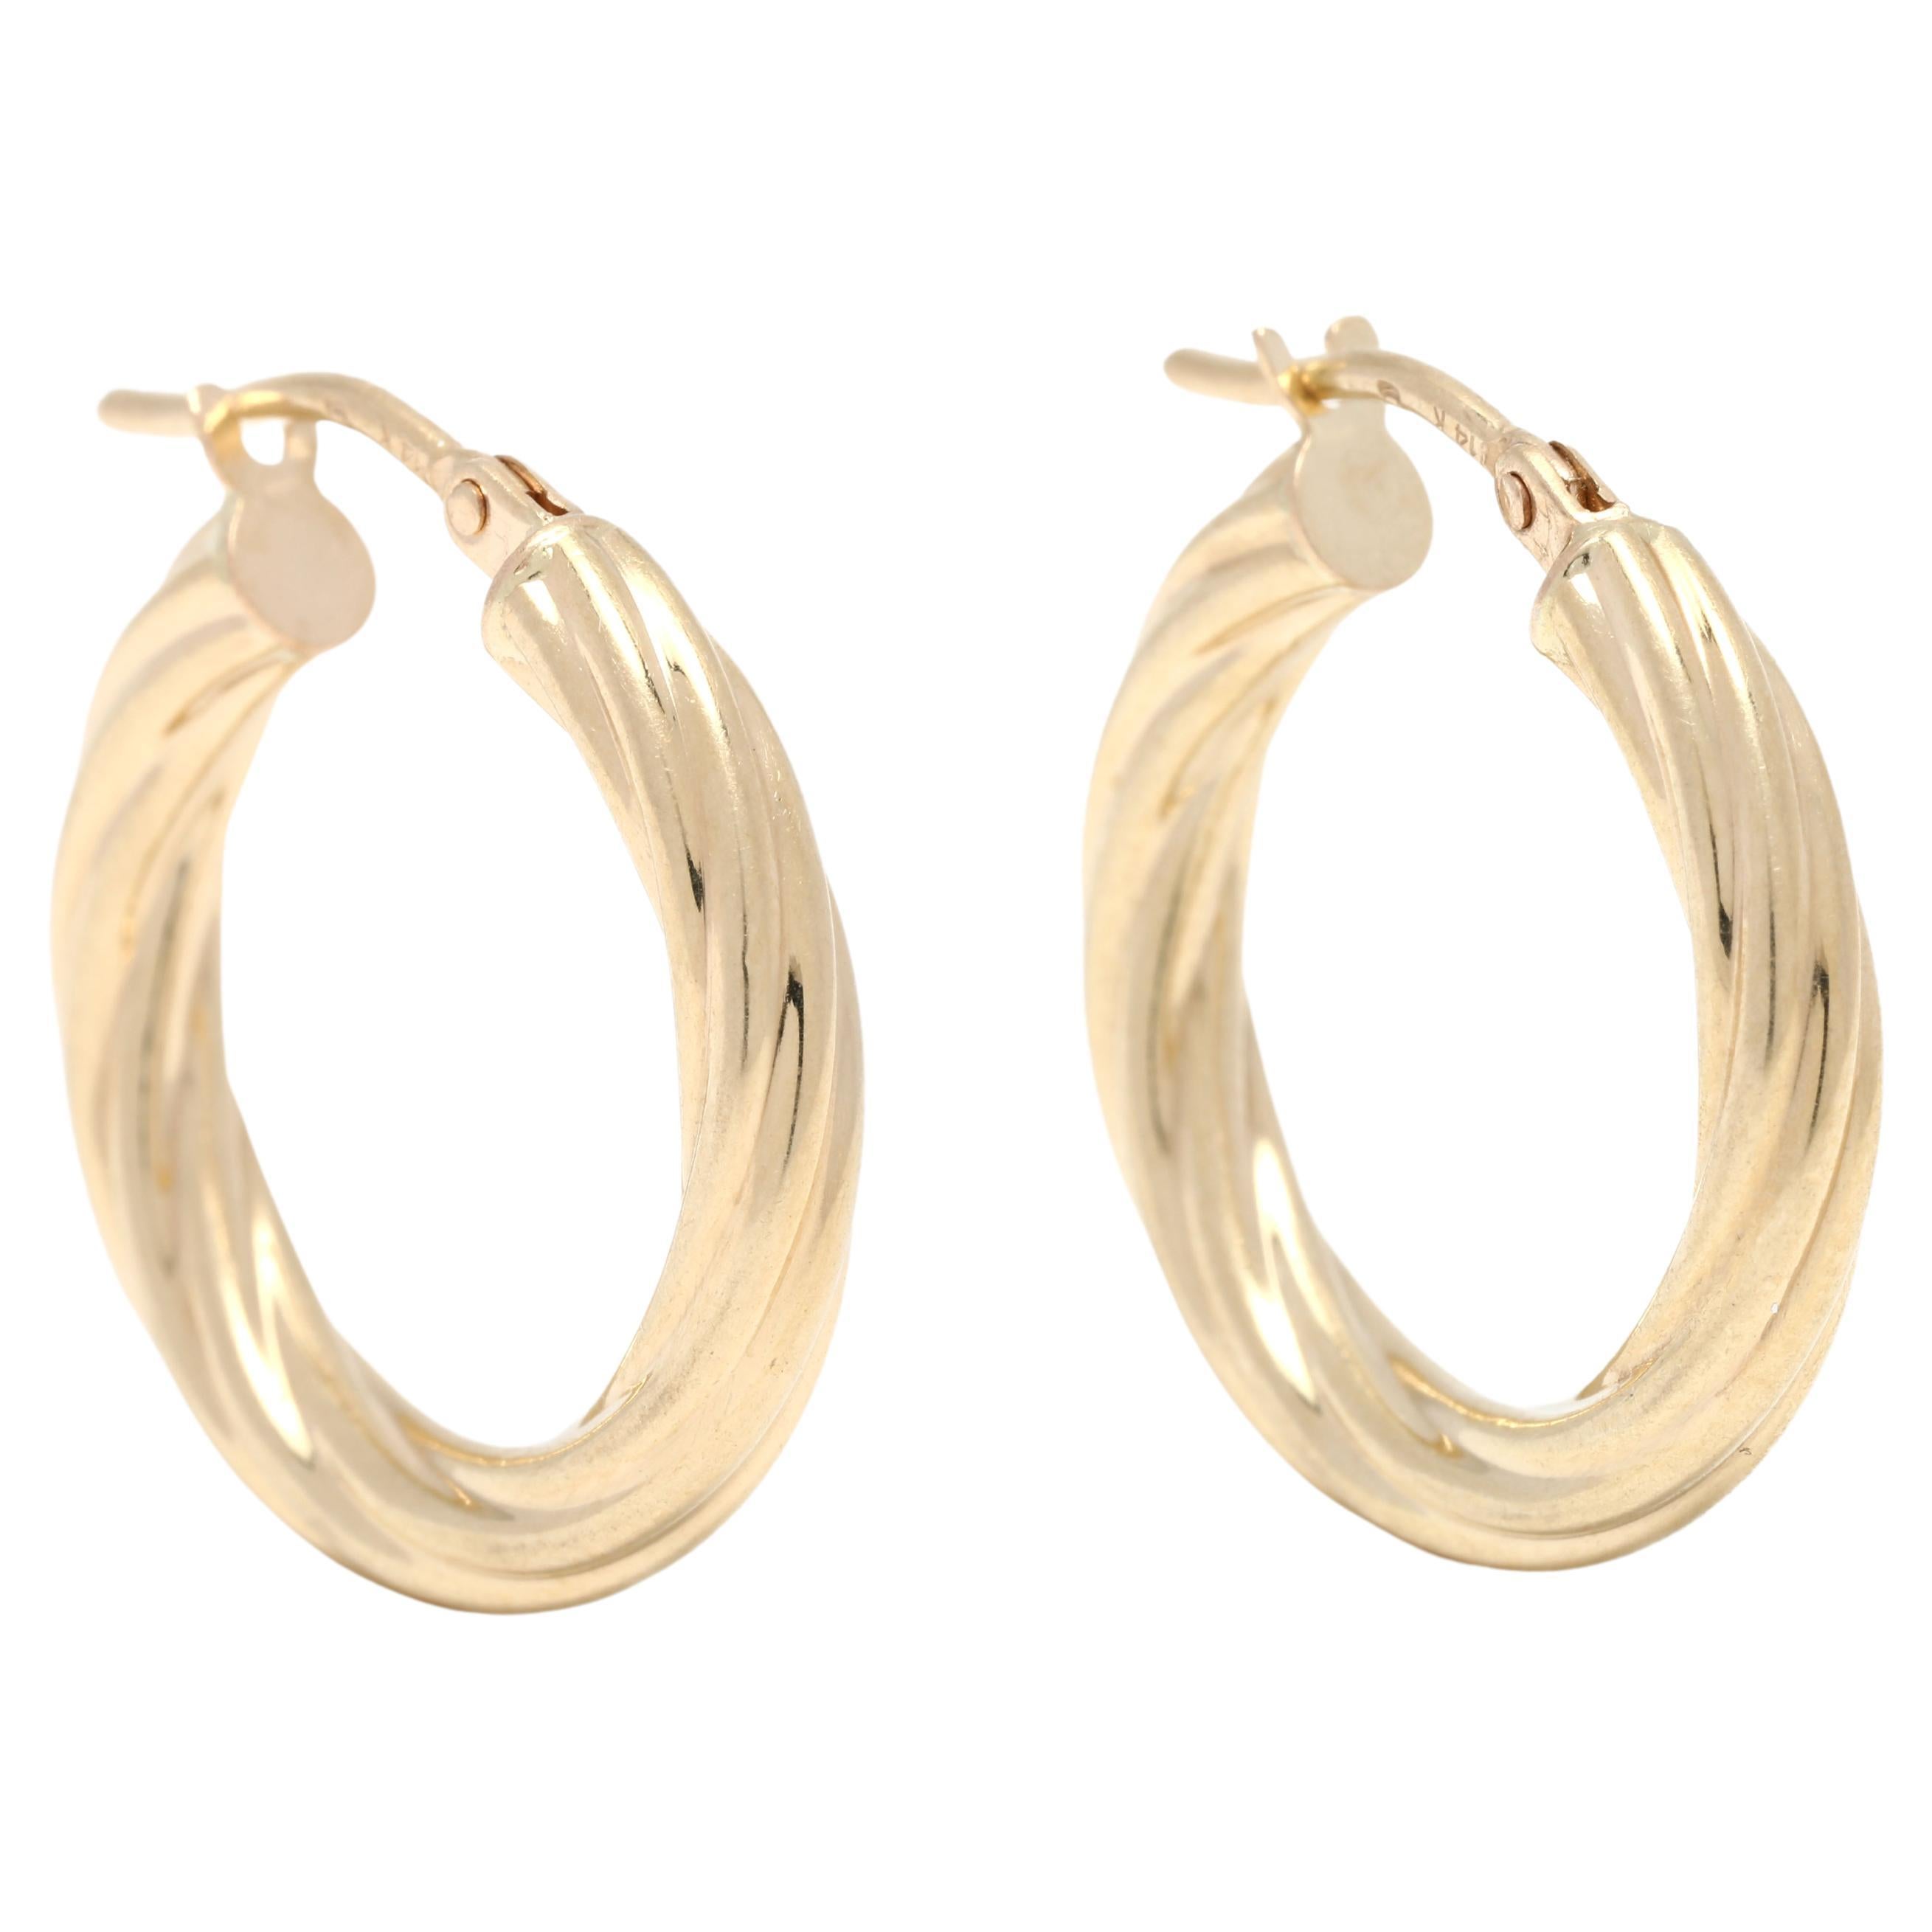 Small Gold Twist Hoop Earrings, 14K Yellow Gold, Simple Gold 